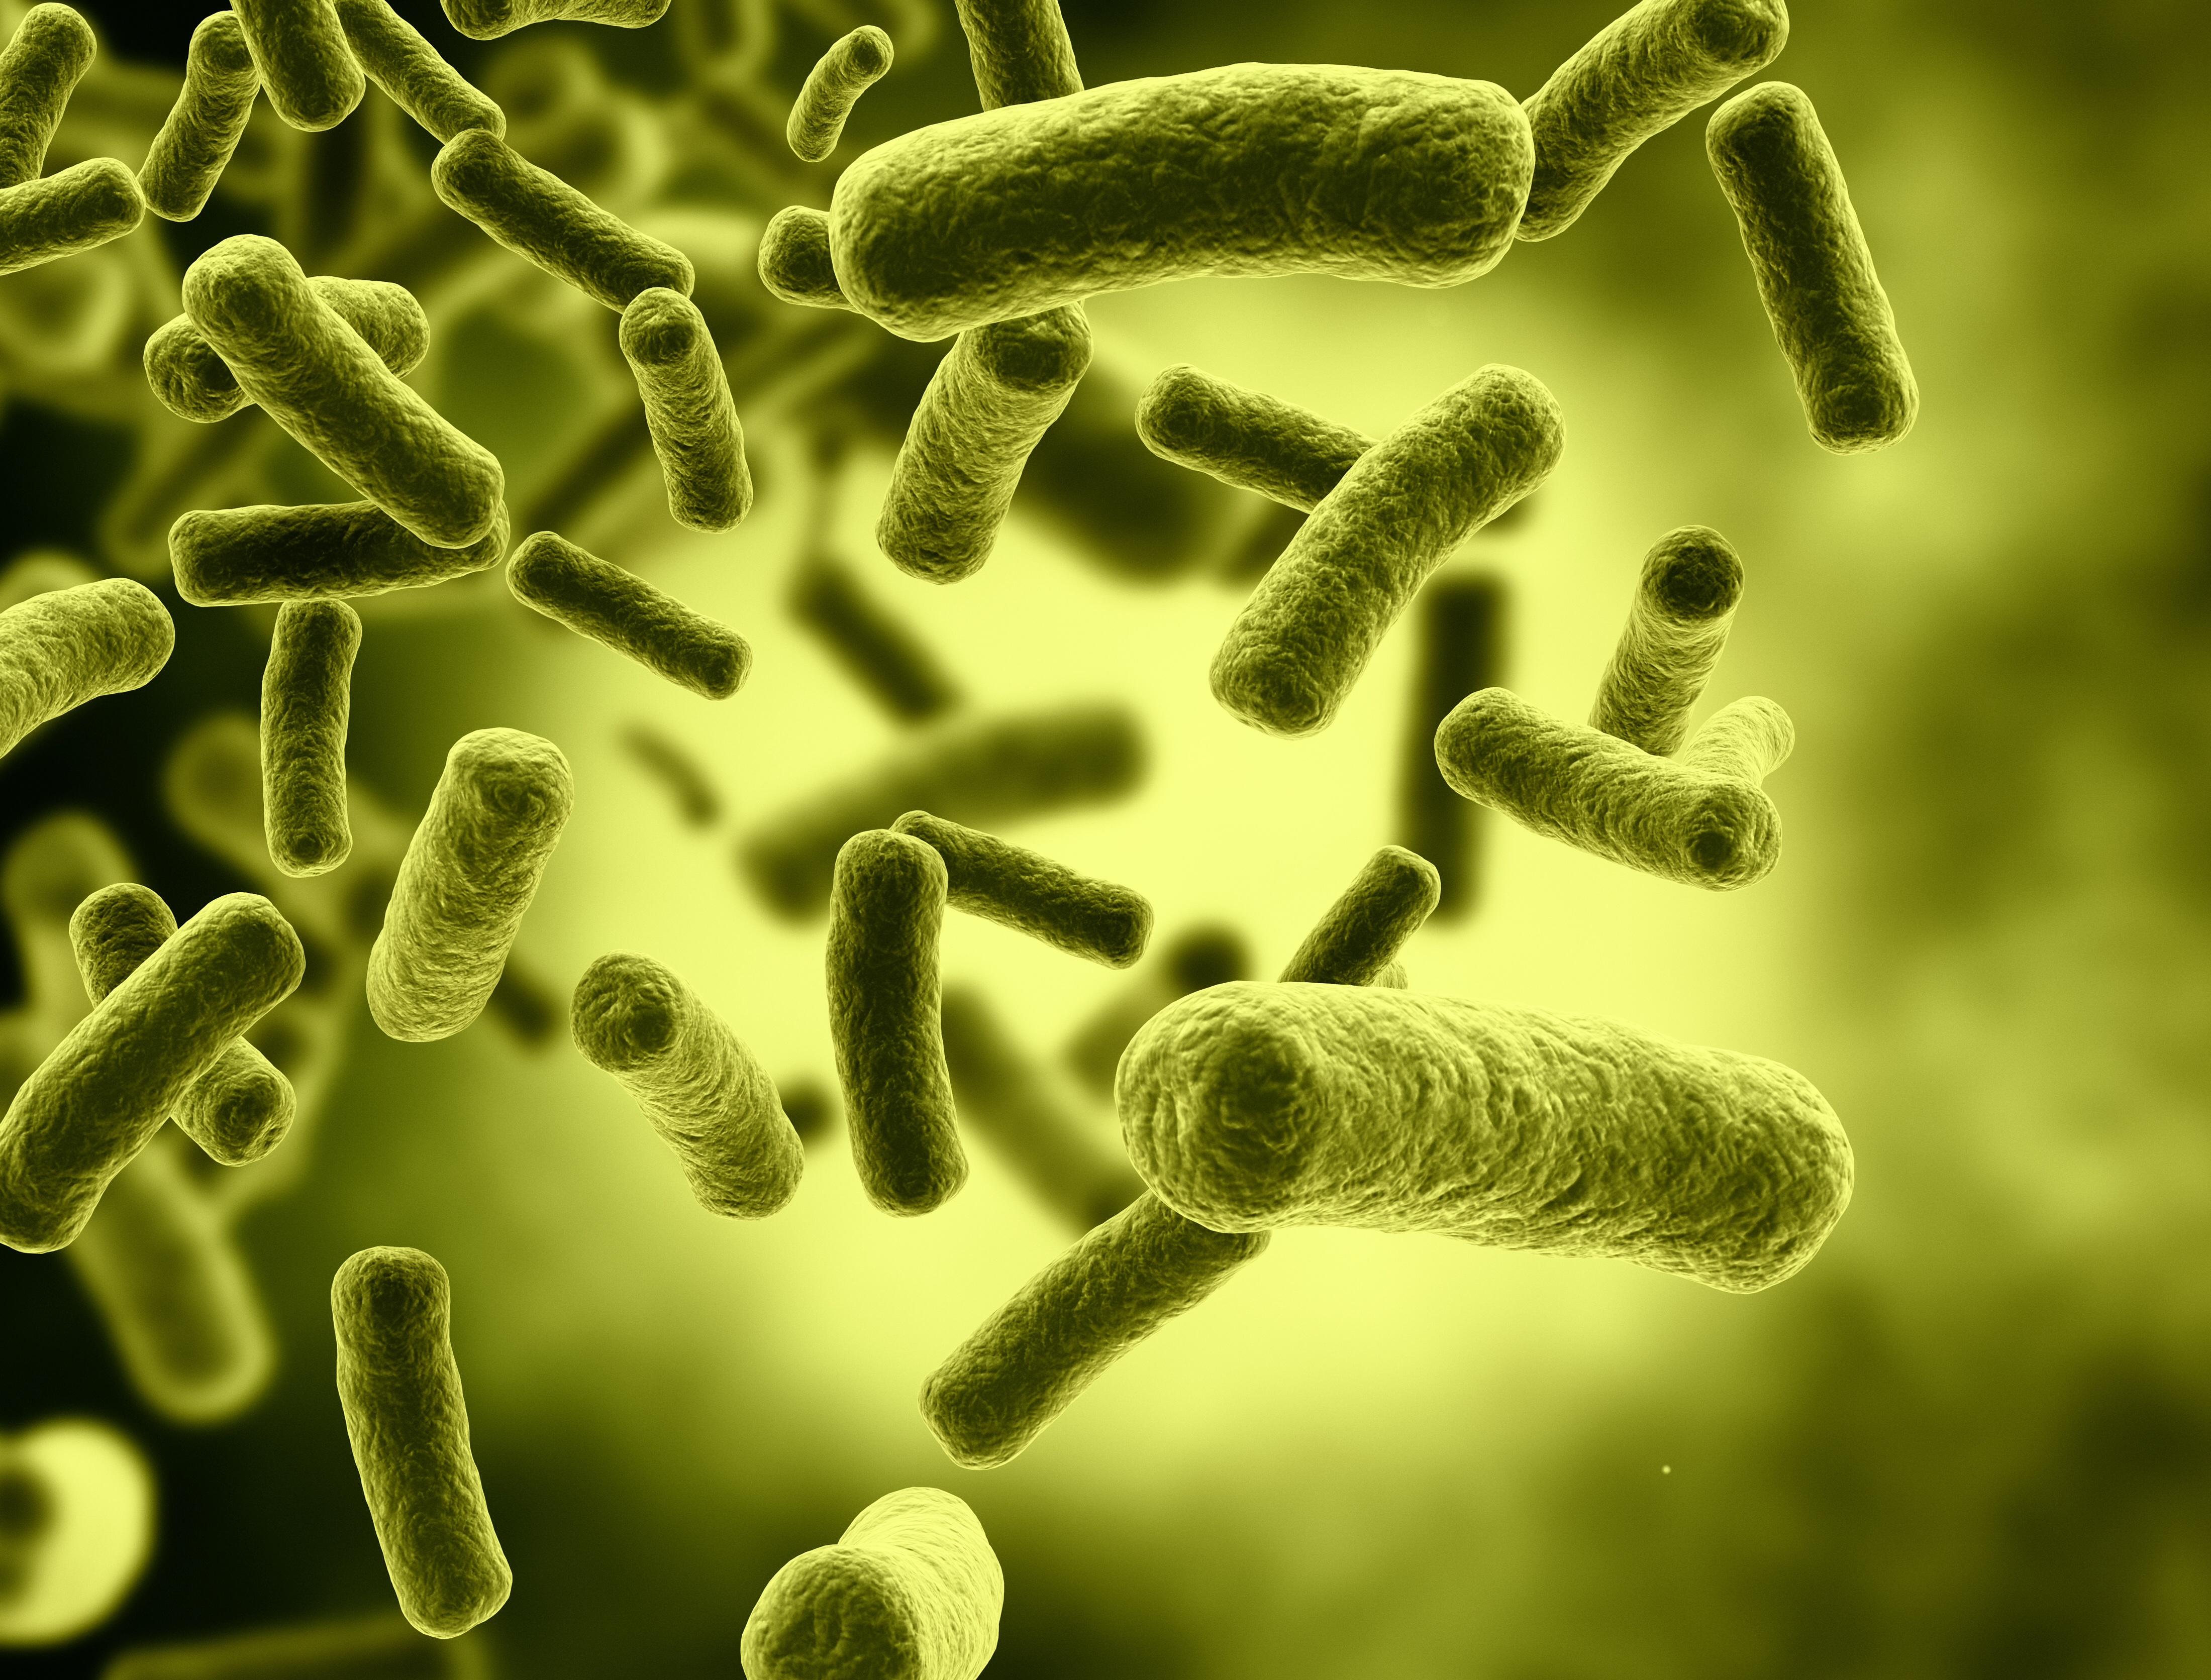 Flesh-eating bacteria kills man after only four days